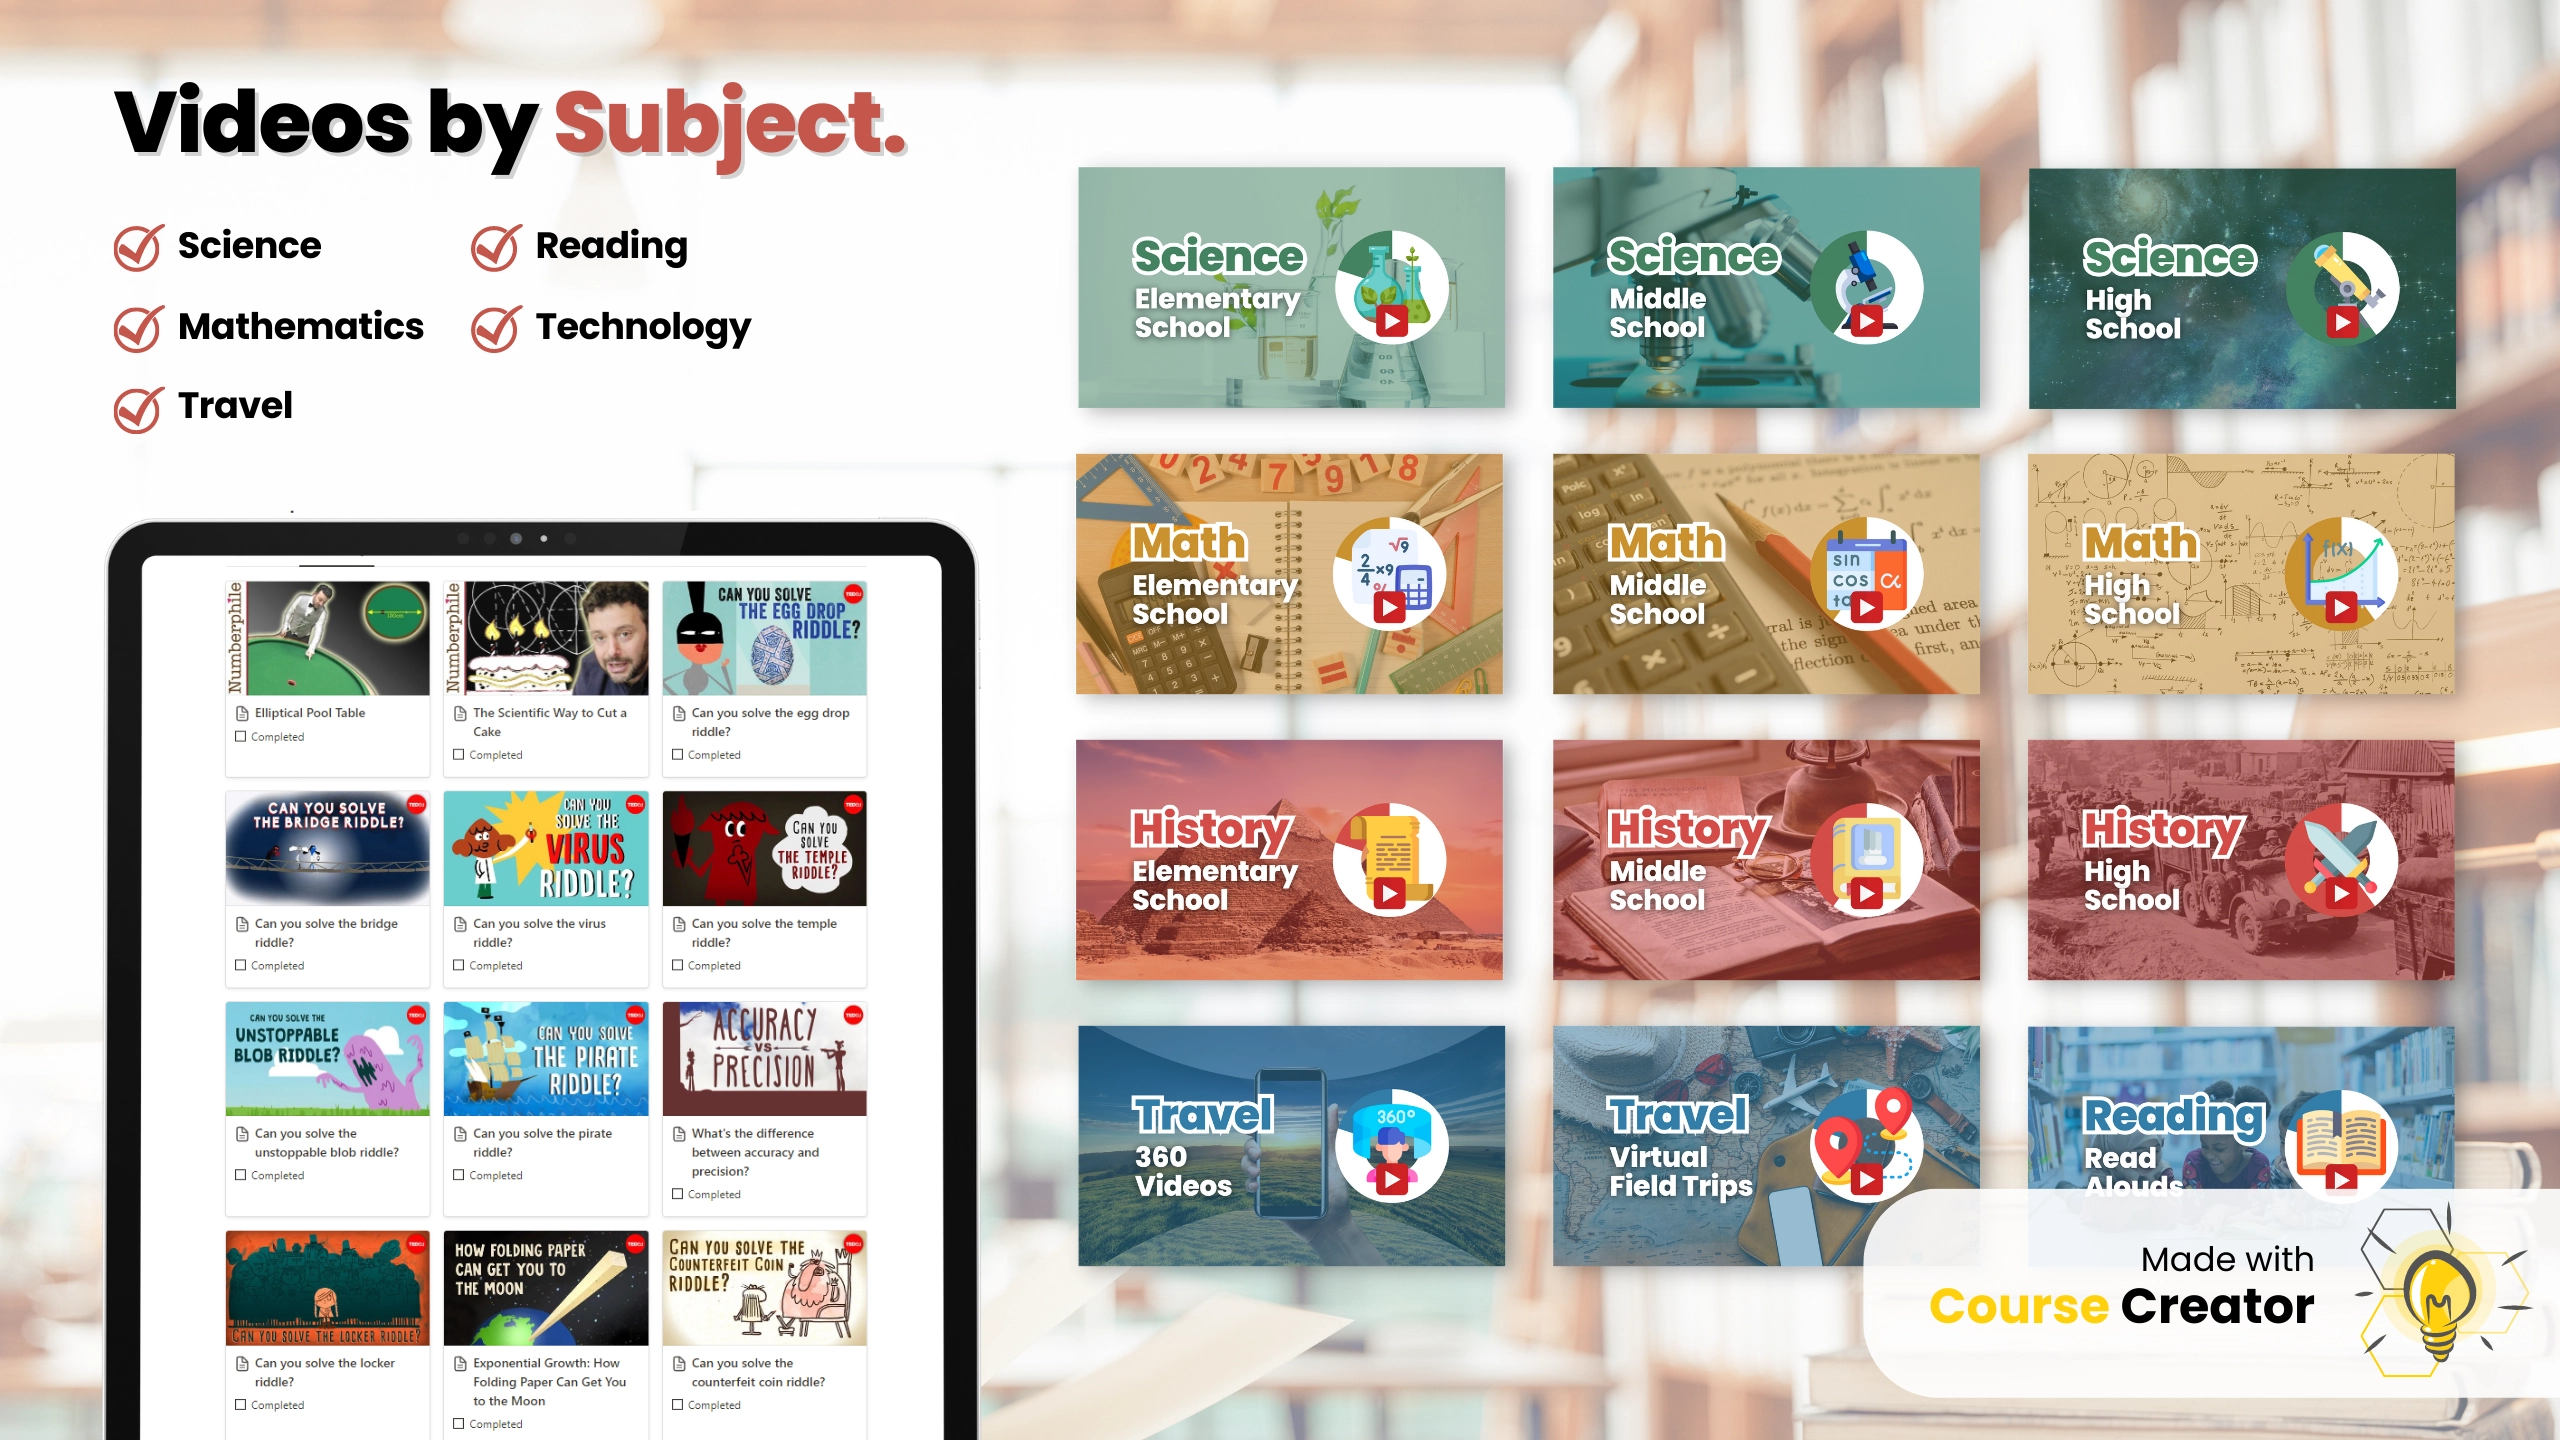 Notion Education Video Library - Learning Resource in 